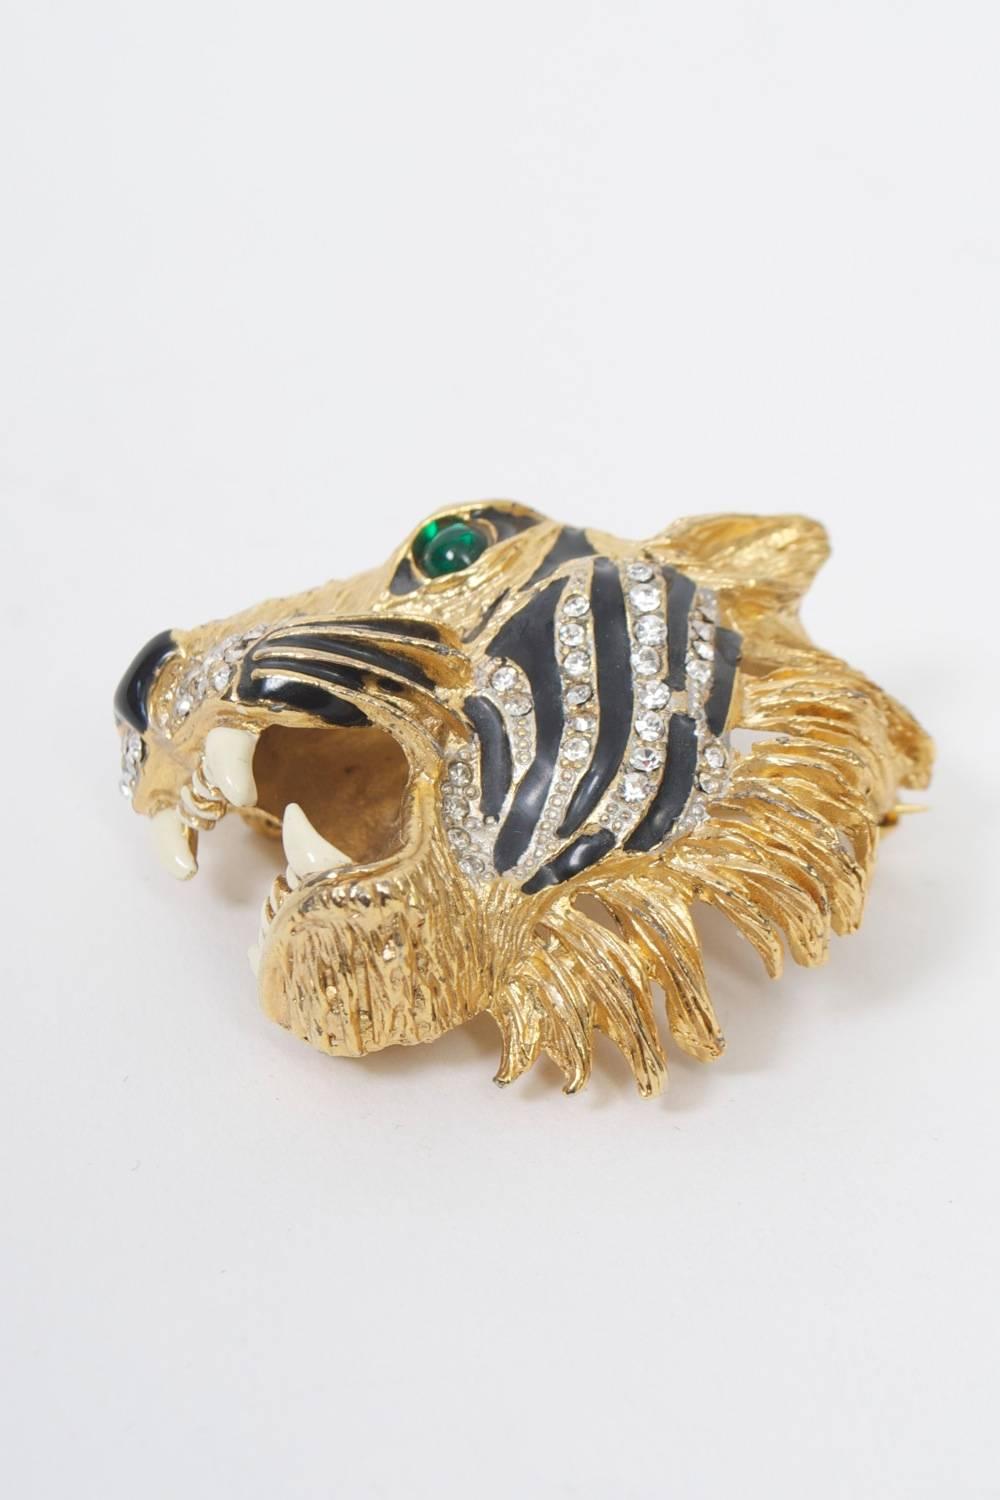 Roaring tiger head brooch by Butler & Wilson, 1980s, based on a Hattie Carnegie original. Composed of grooved gold metal with black enamel and rhinestone stripes, ivory enamel teeth, and a green stone eye. Unsigned, but rectangular stamp with A